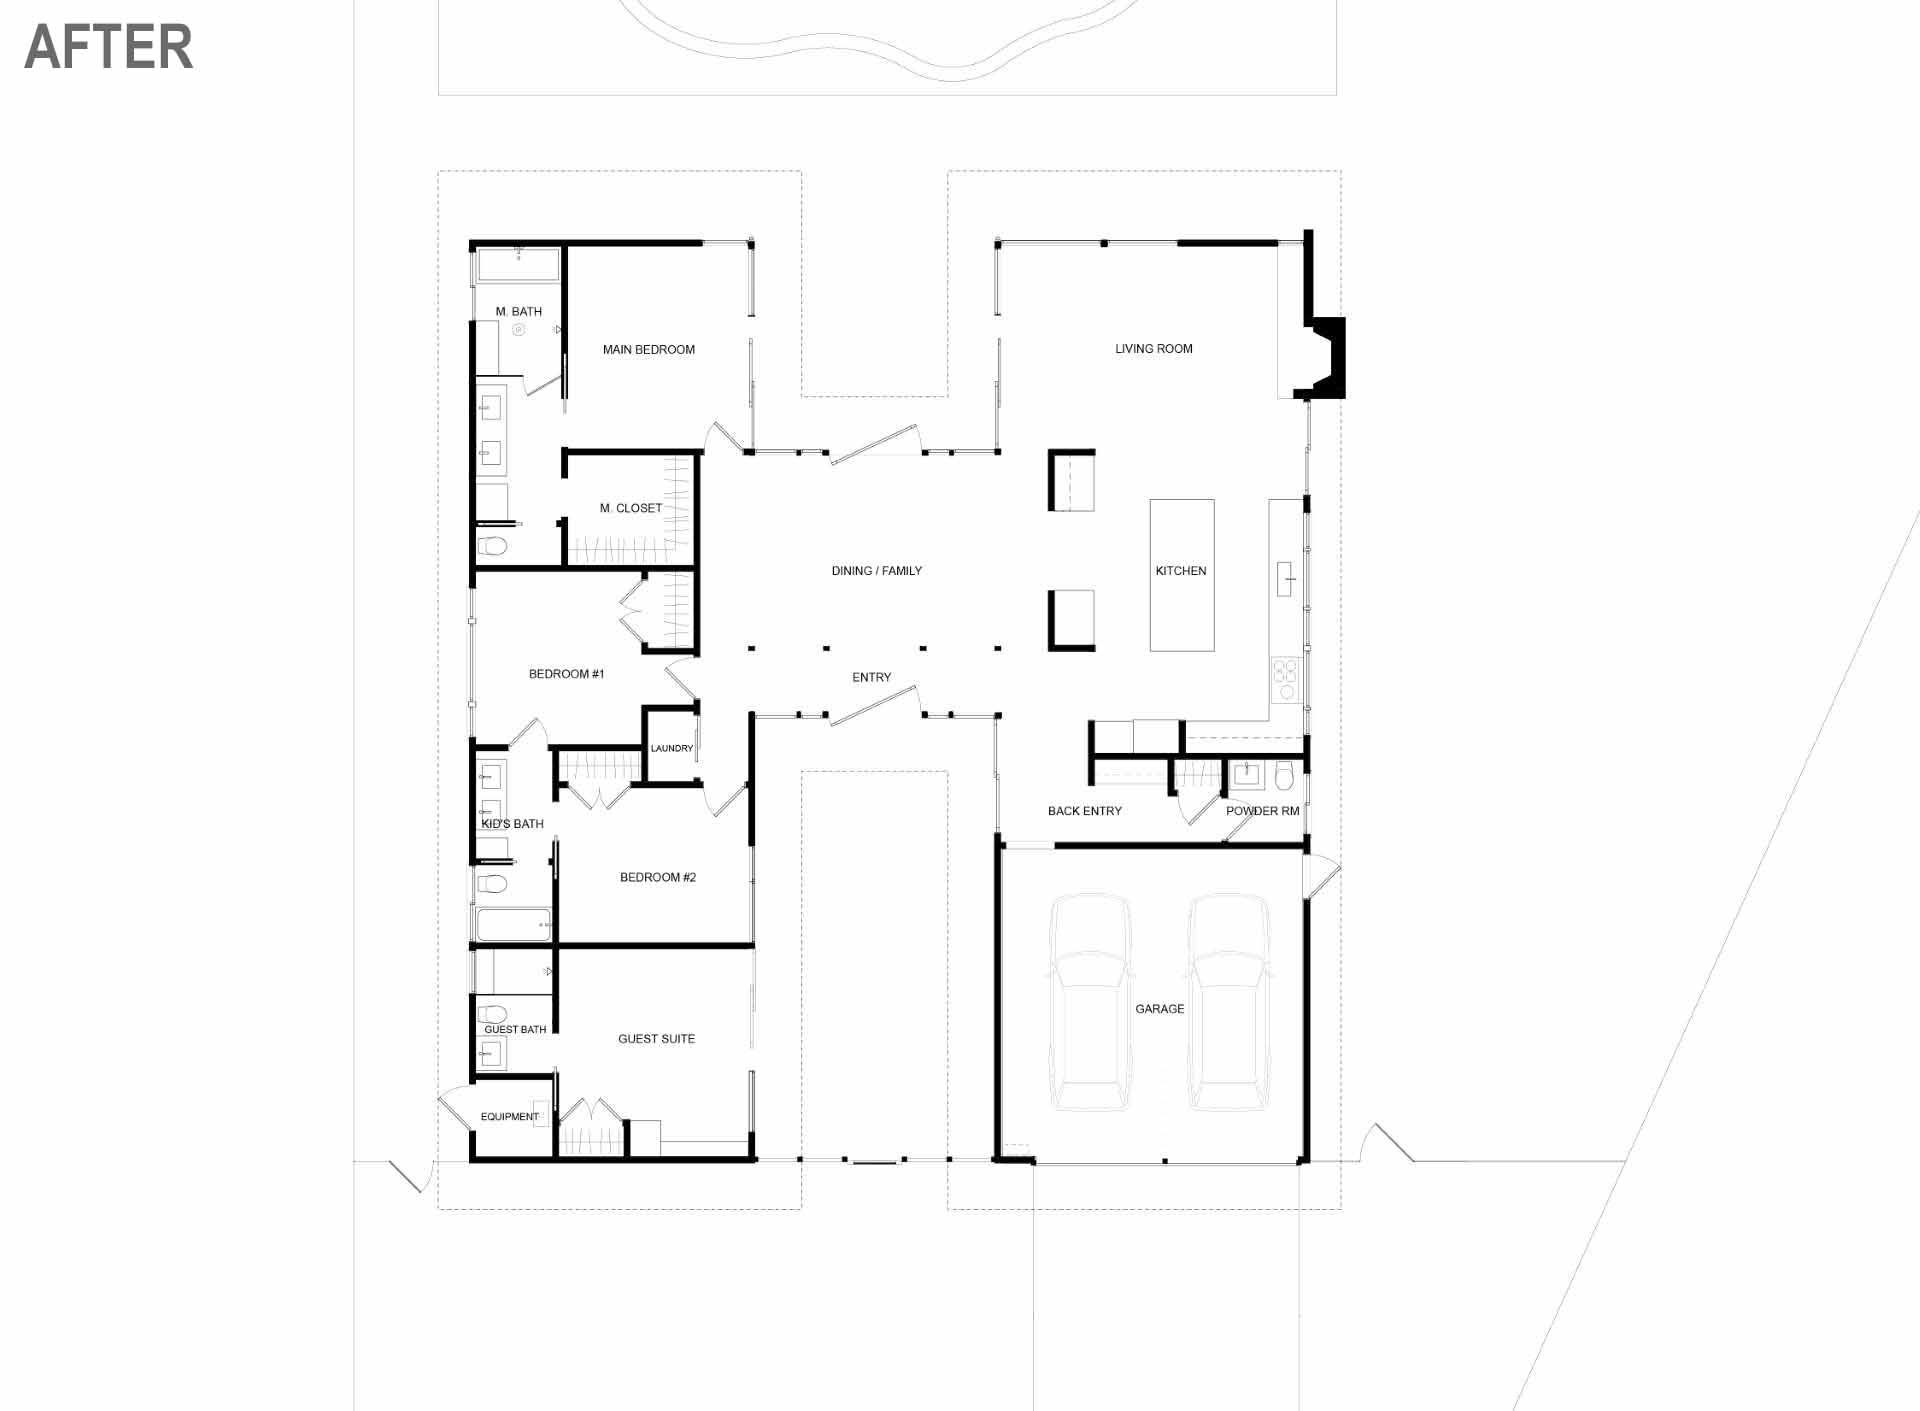 The floor plan of a remodeled Eichler home.